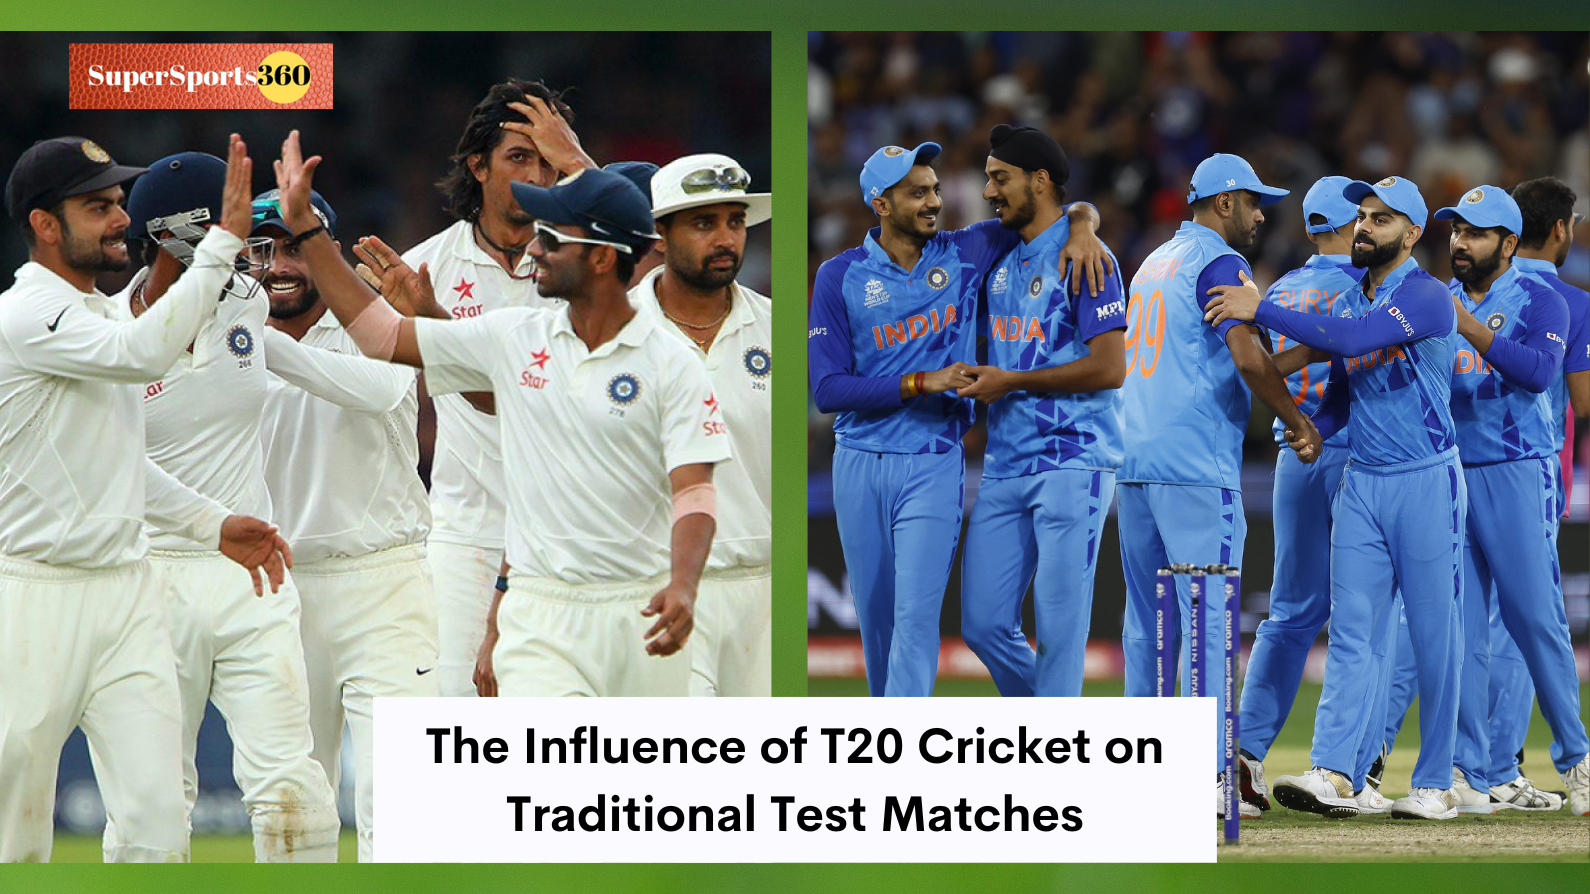 The Influence of T20 Cricket on Traditional Test Matches